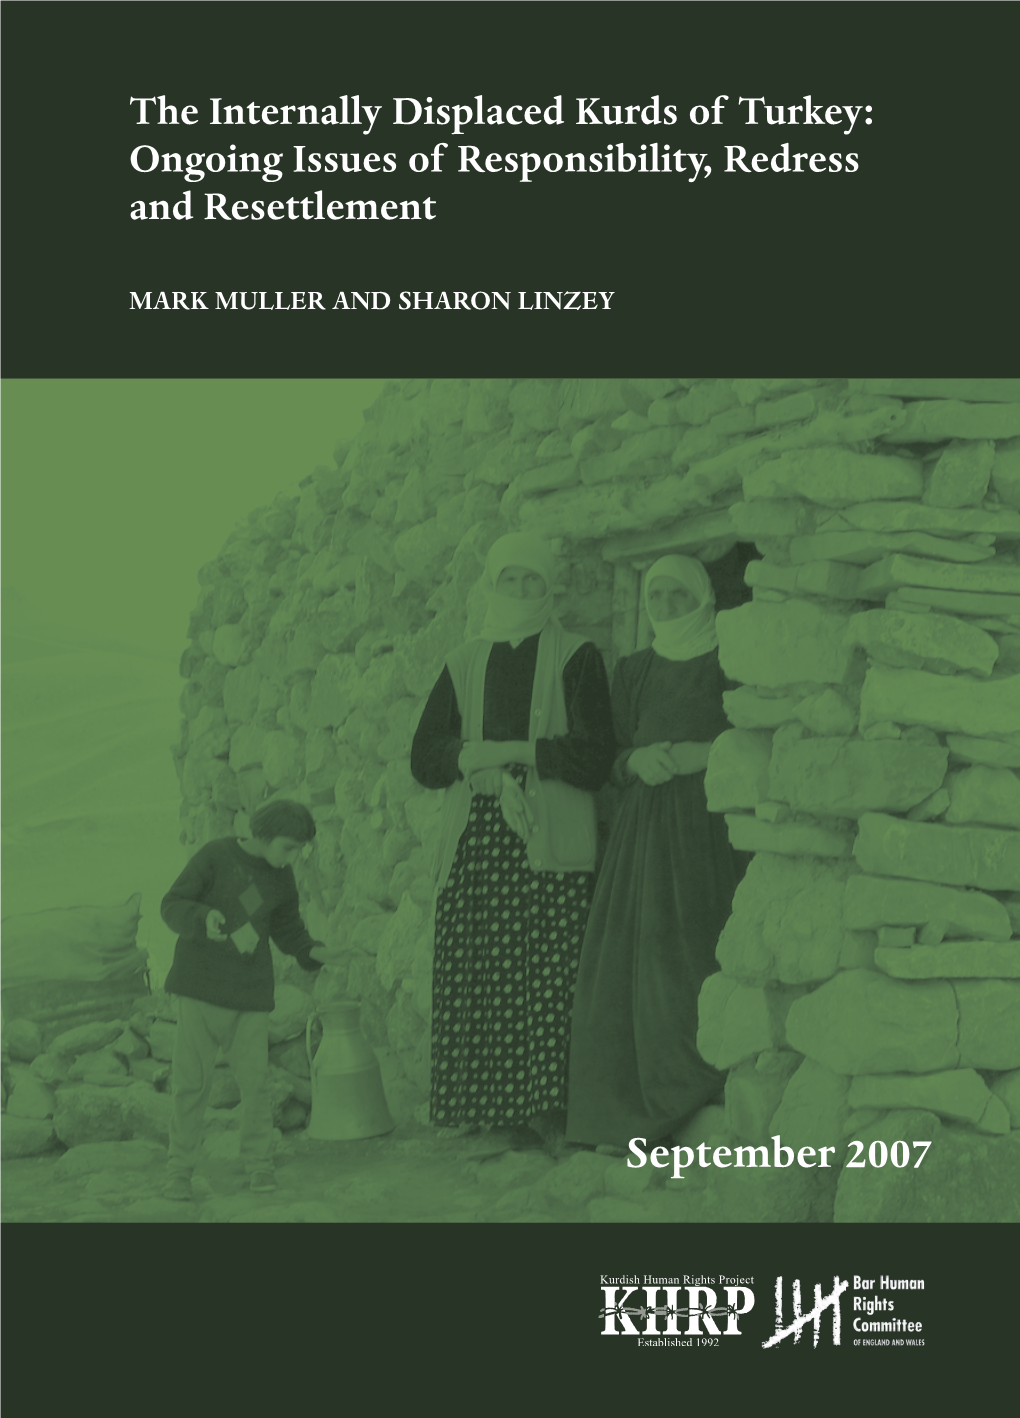 The Internally Displaced Kurds of Turkey: Ongoing Issues of Responsibility, Redress and Resettlement